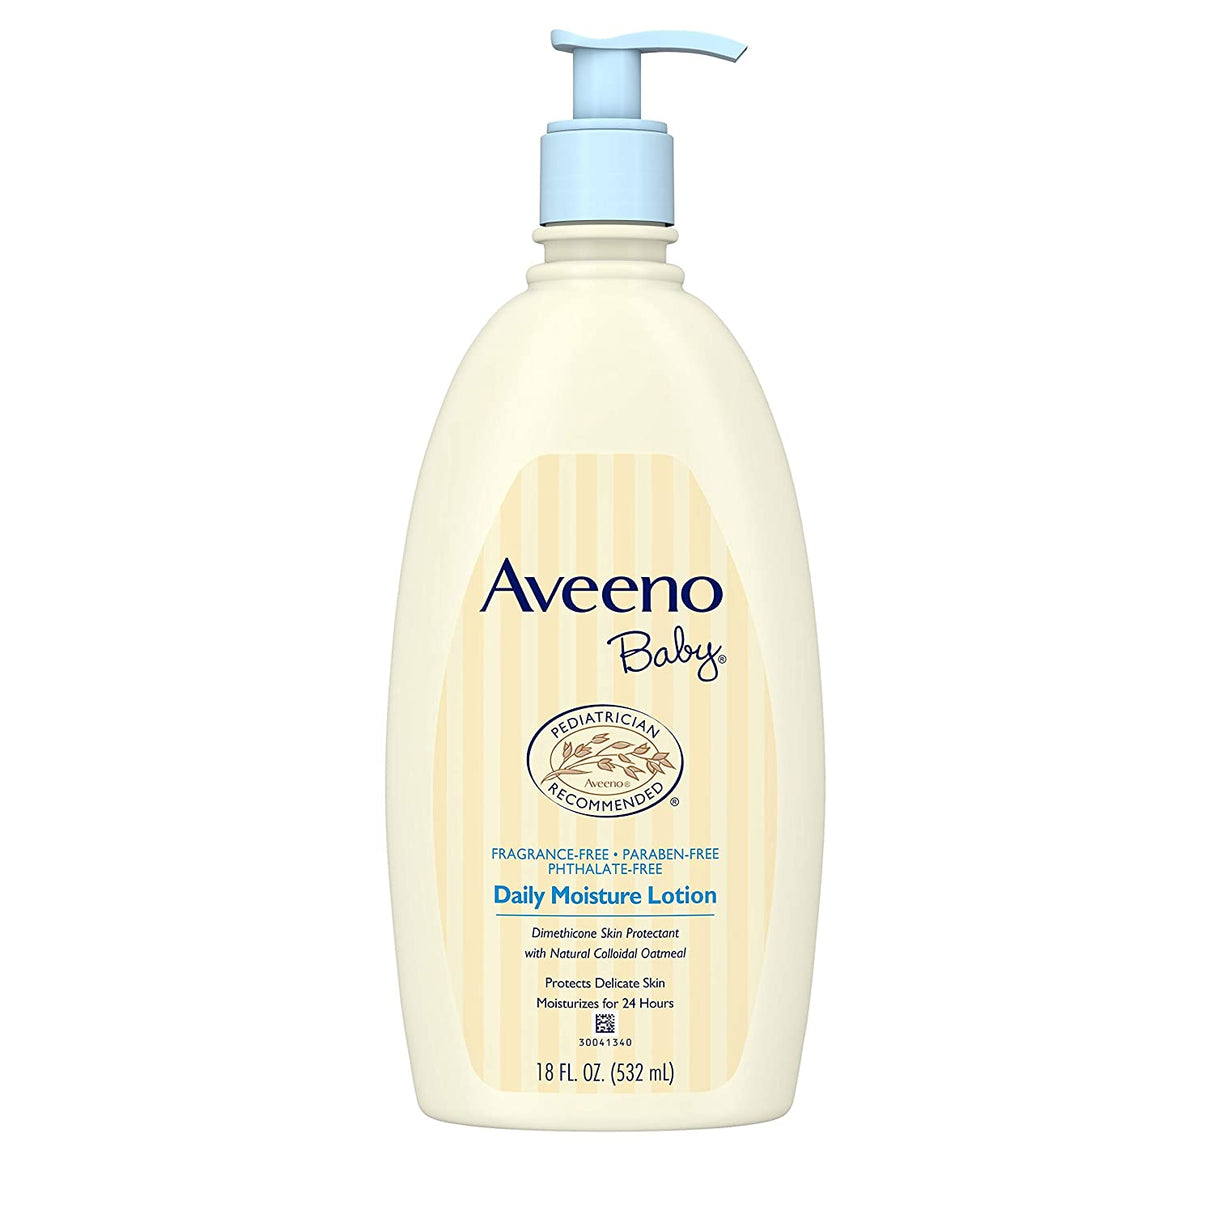 Aveeno Baby Daily Moisture Lotion with Natural Colloidal Oatmeal (18 fl. Oz)